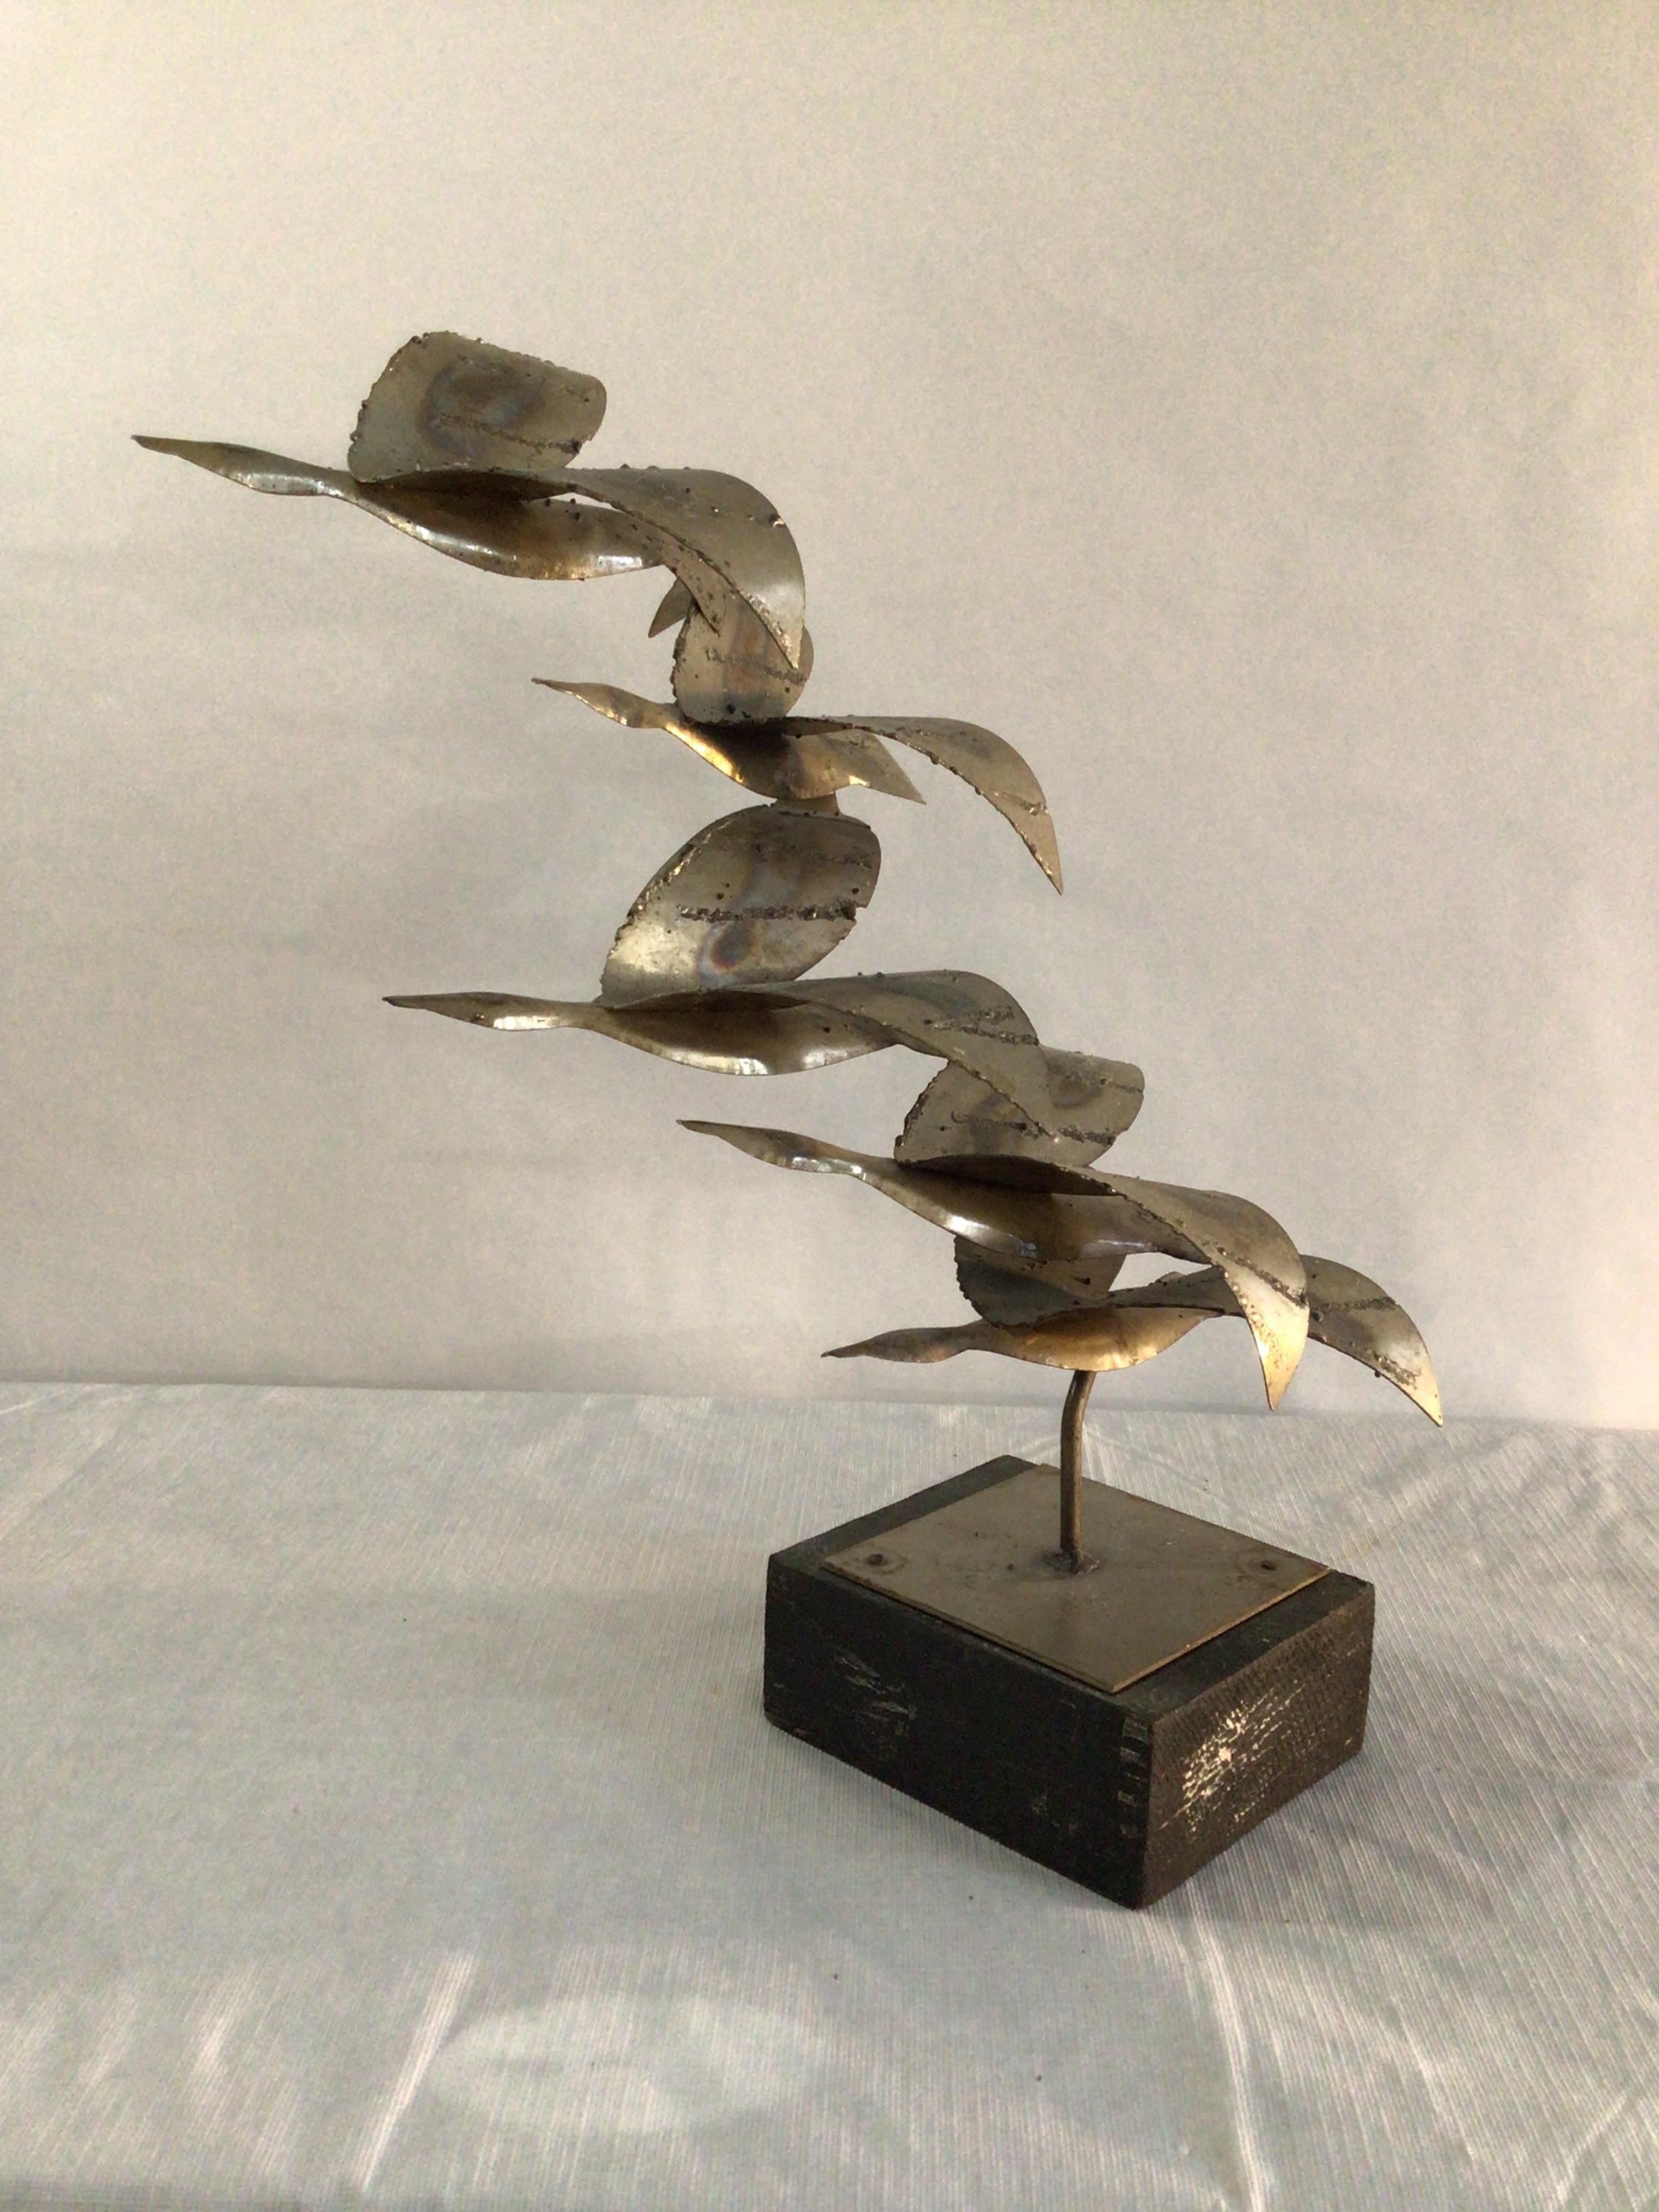 1970s Chrome Sculpture of Birds in Flight on Painted Wood Base
5 Birds Ascending in Flight
Vintage Brutalist sculpture
Richly textured with patinated torch cut metal mounted atop a charcoal colored wood base
Sculpture is finished in the round.